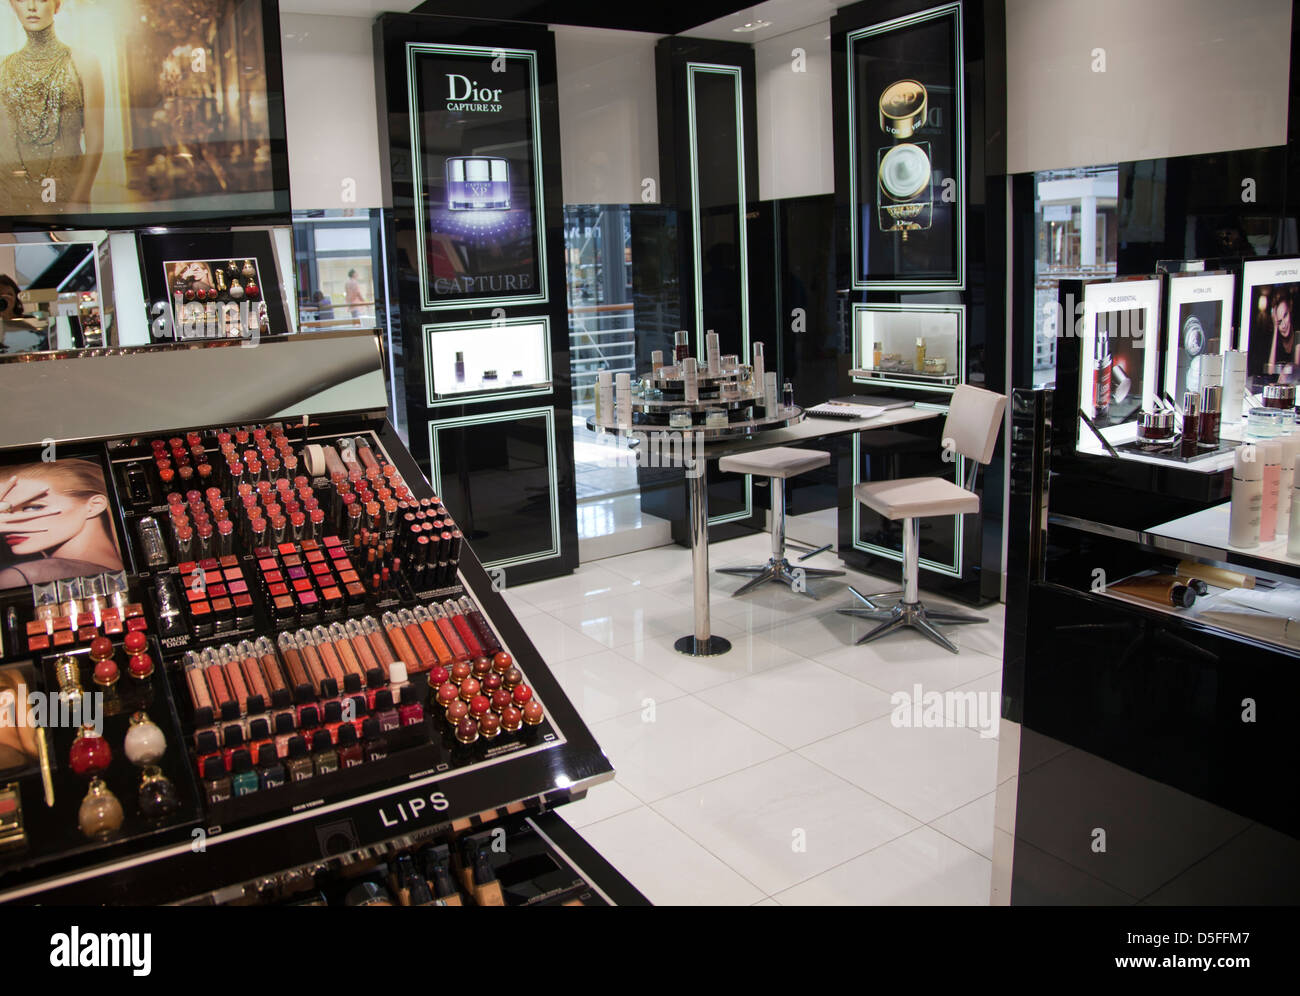 dior cosmetics south africa